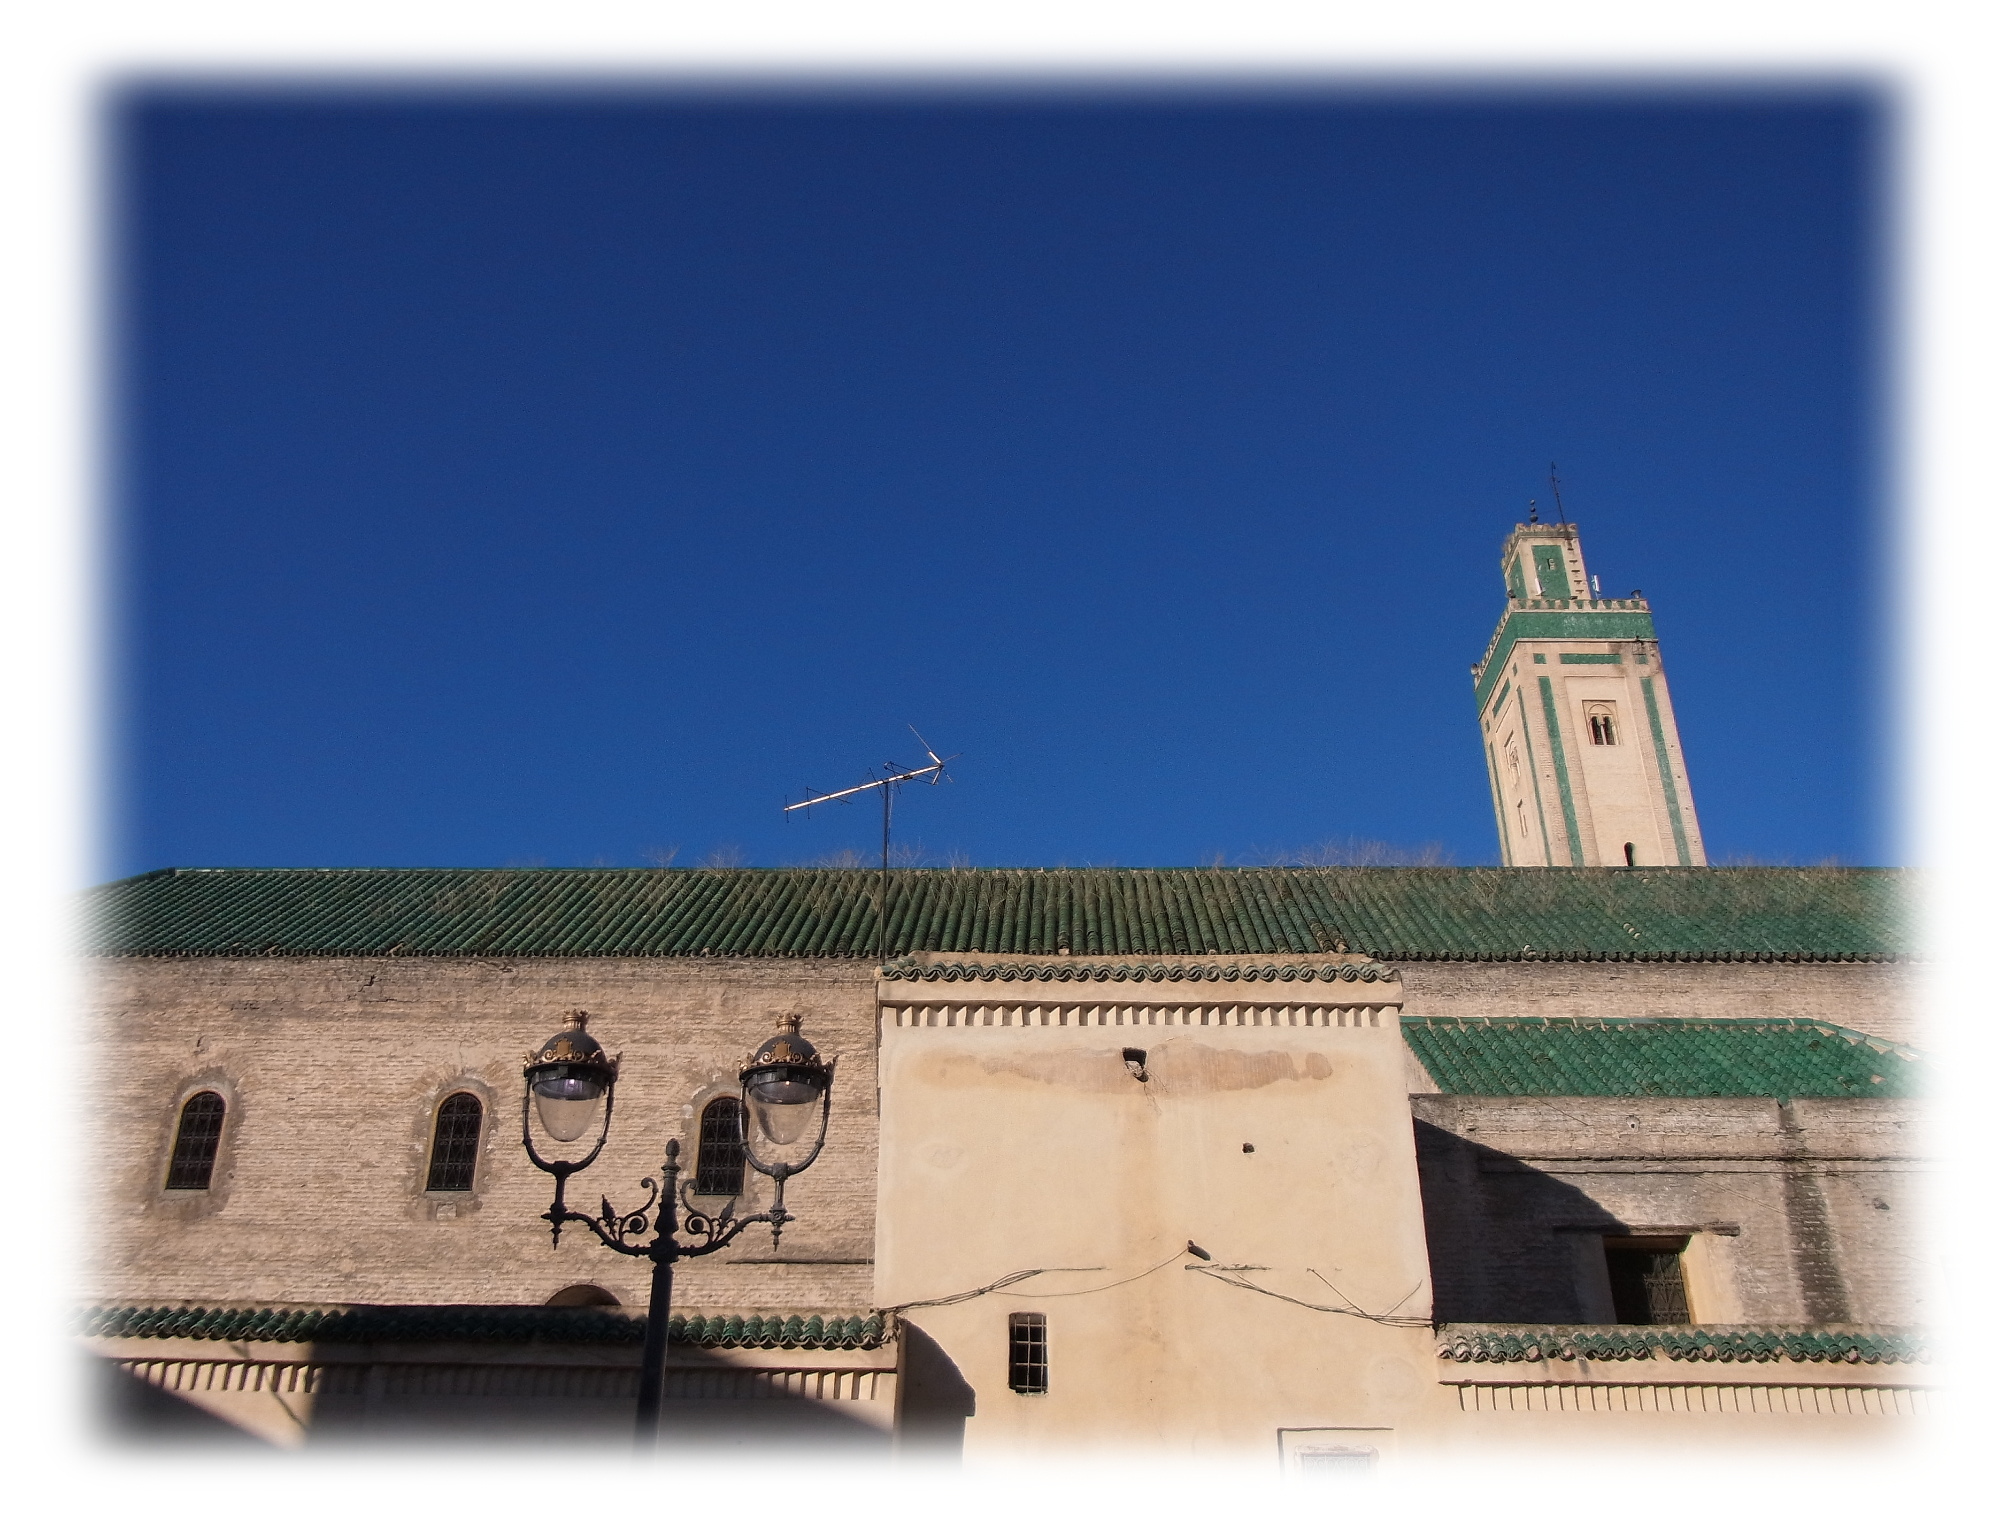 Green roof of Kairaouine Mosque of Fes with the minaret of Bou Inania Madrasa